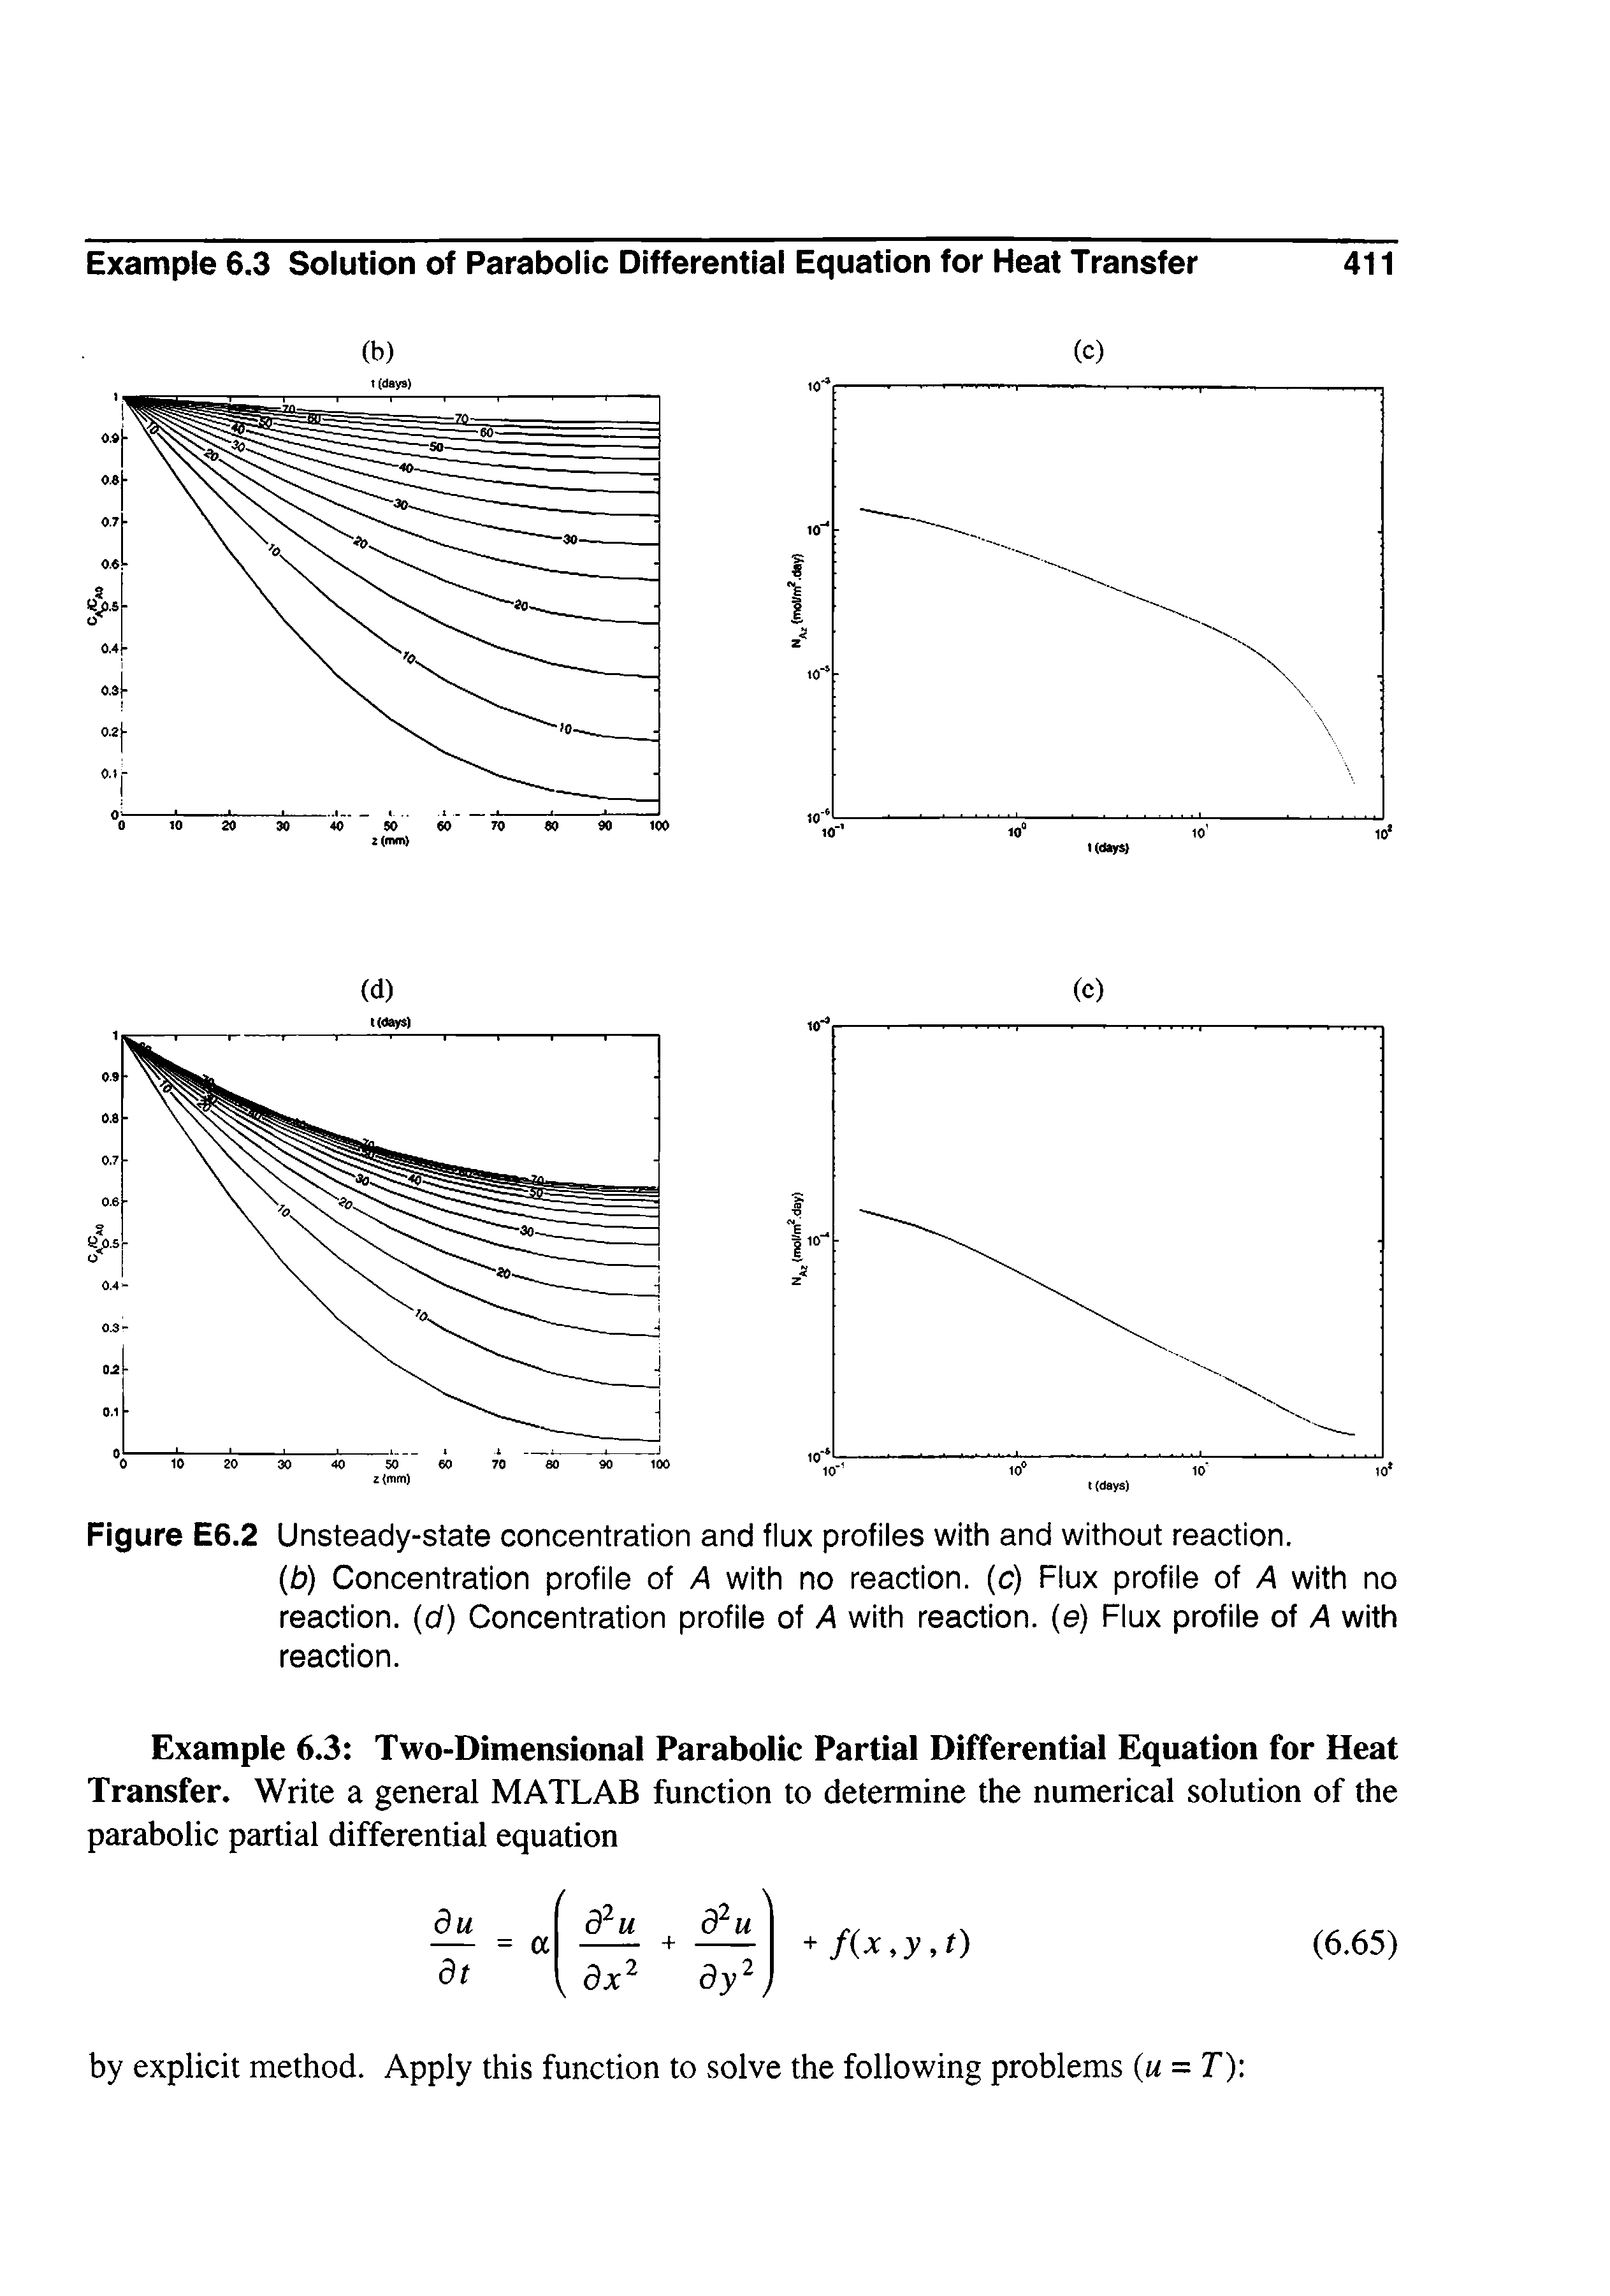 Figure E6.2 Unsteady-state concentration and flux profiles with and without reaction.